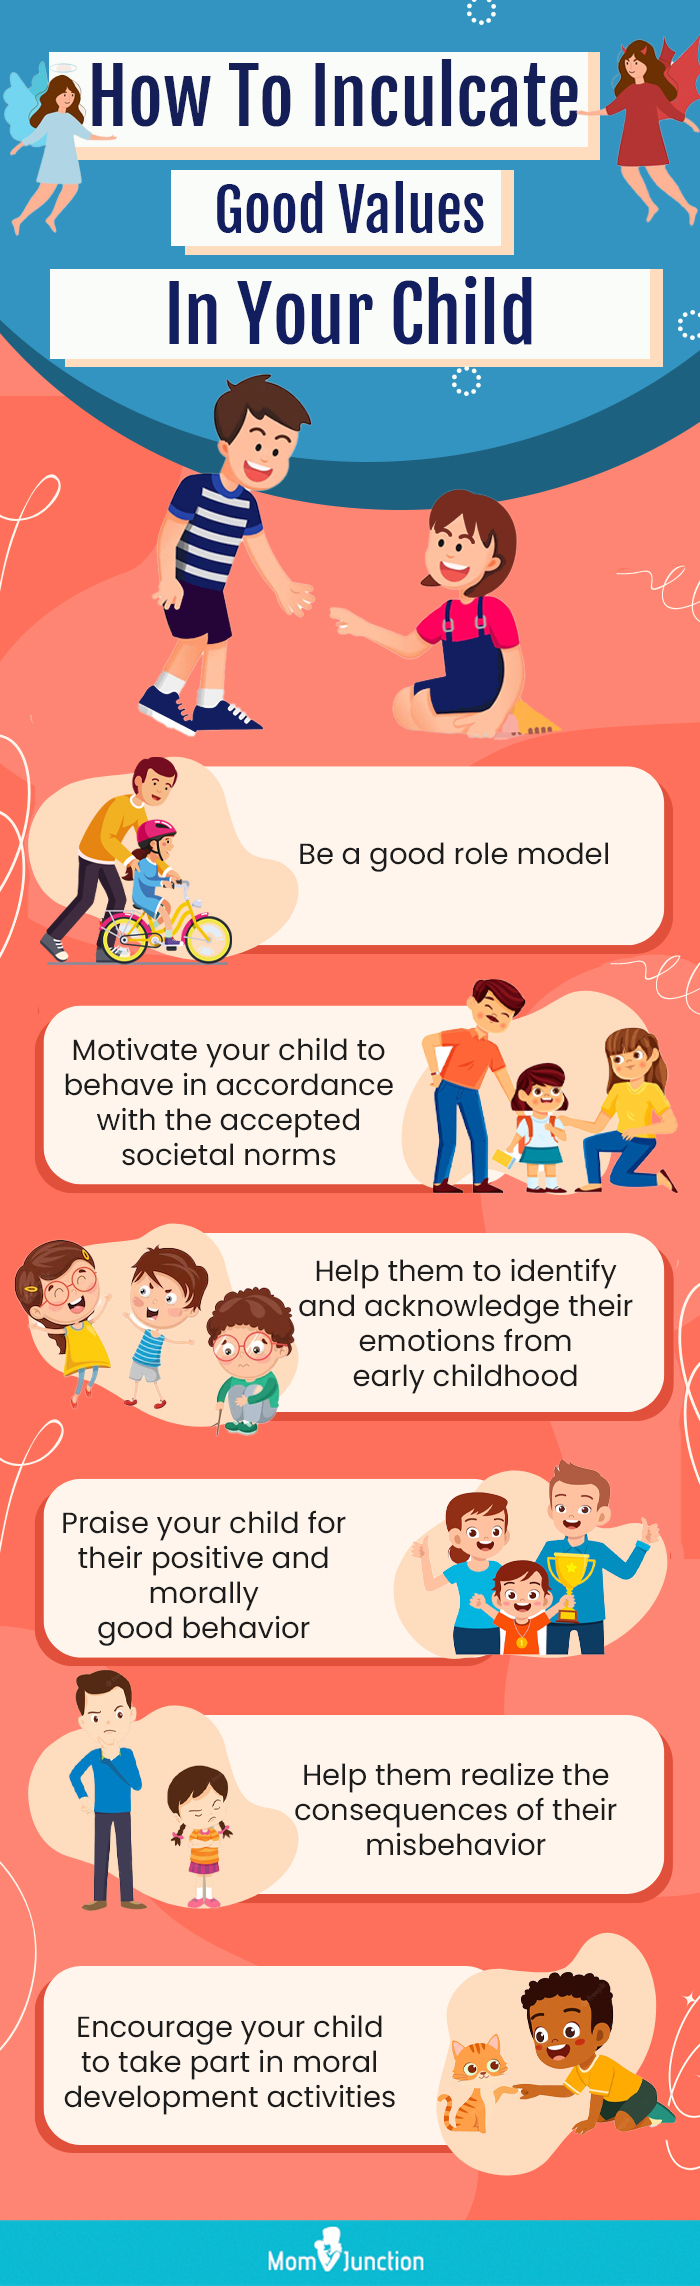 how to inculcate good values in your child [infographic]